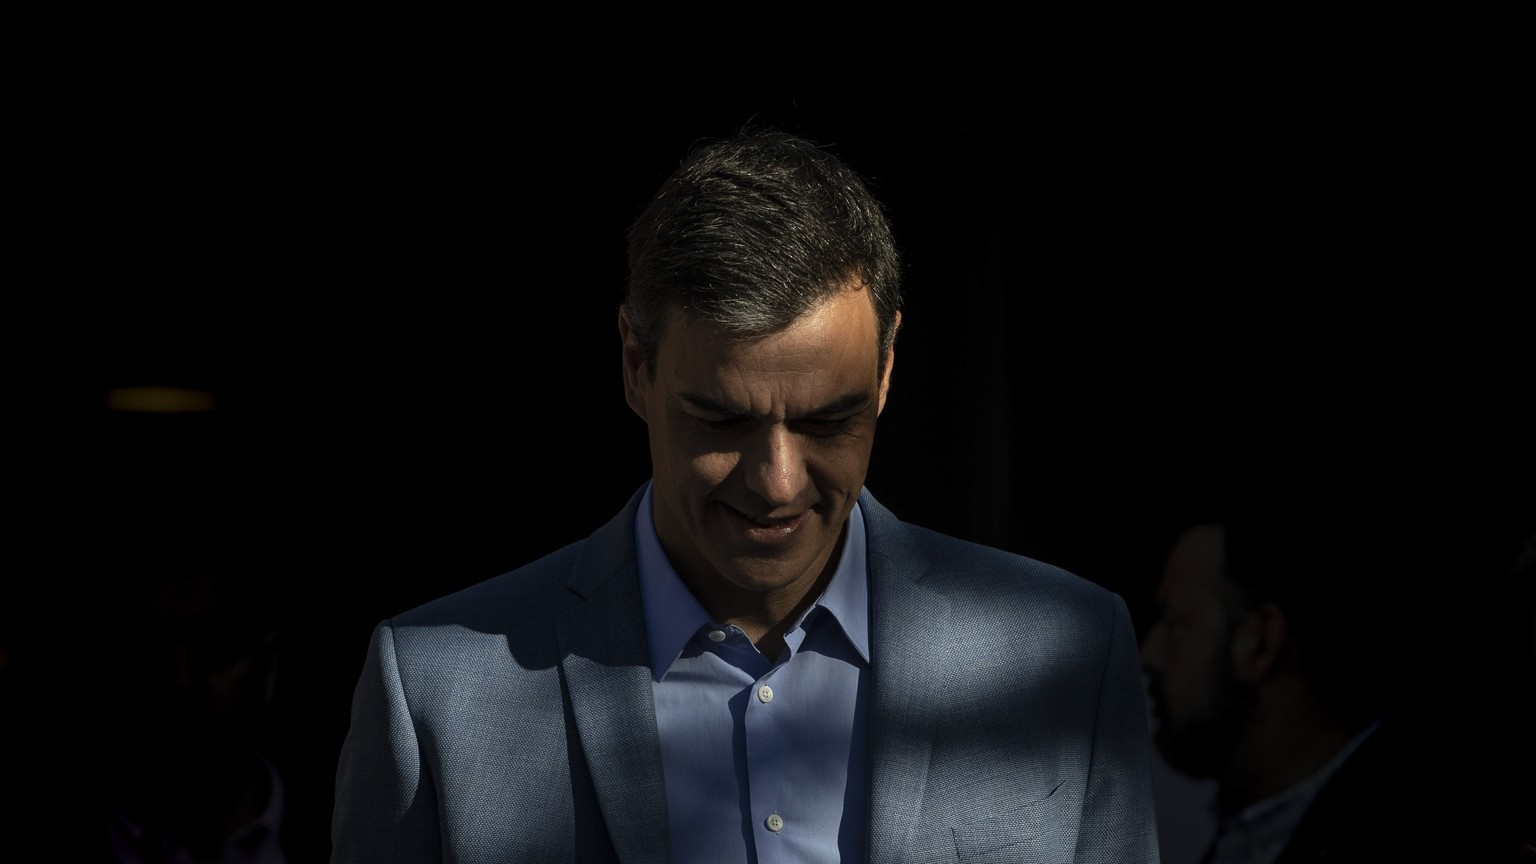 Spanish Prime Minister and Socialist Party candidate Pedro Sanchez leaves a polling station after casting his vote during Spain&#039;s general election in Pozuelo de Alarcon, outskirts of Madrid, Sund ...